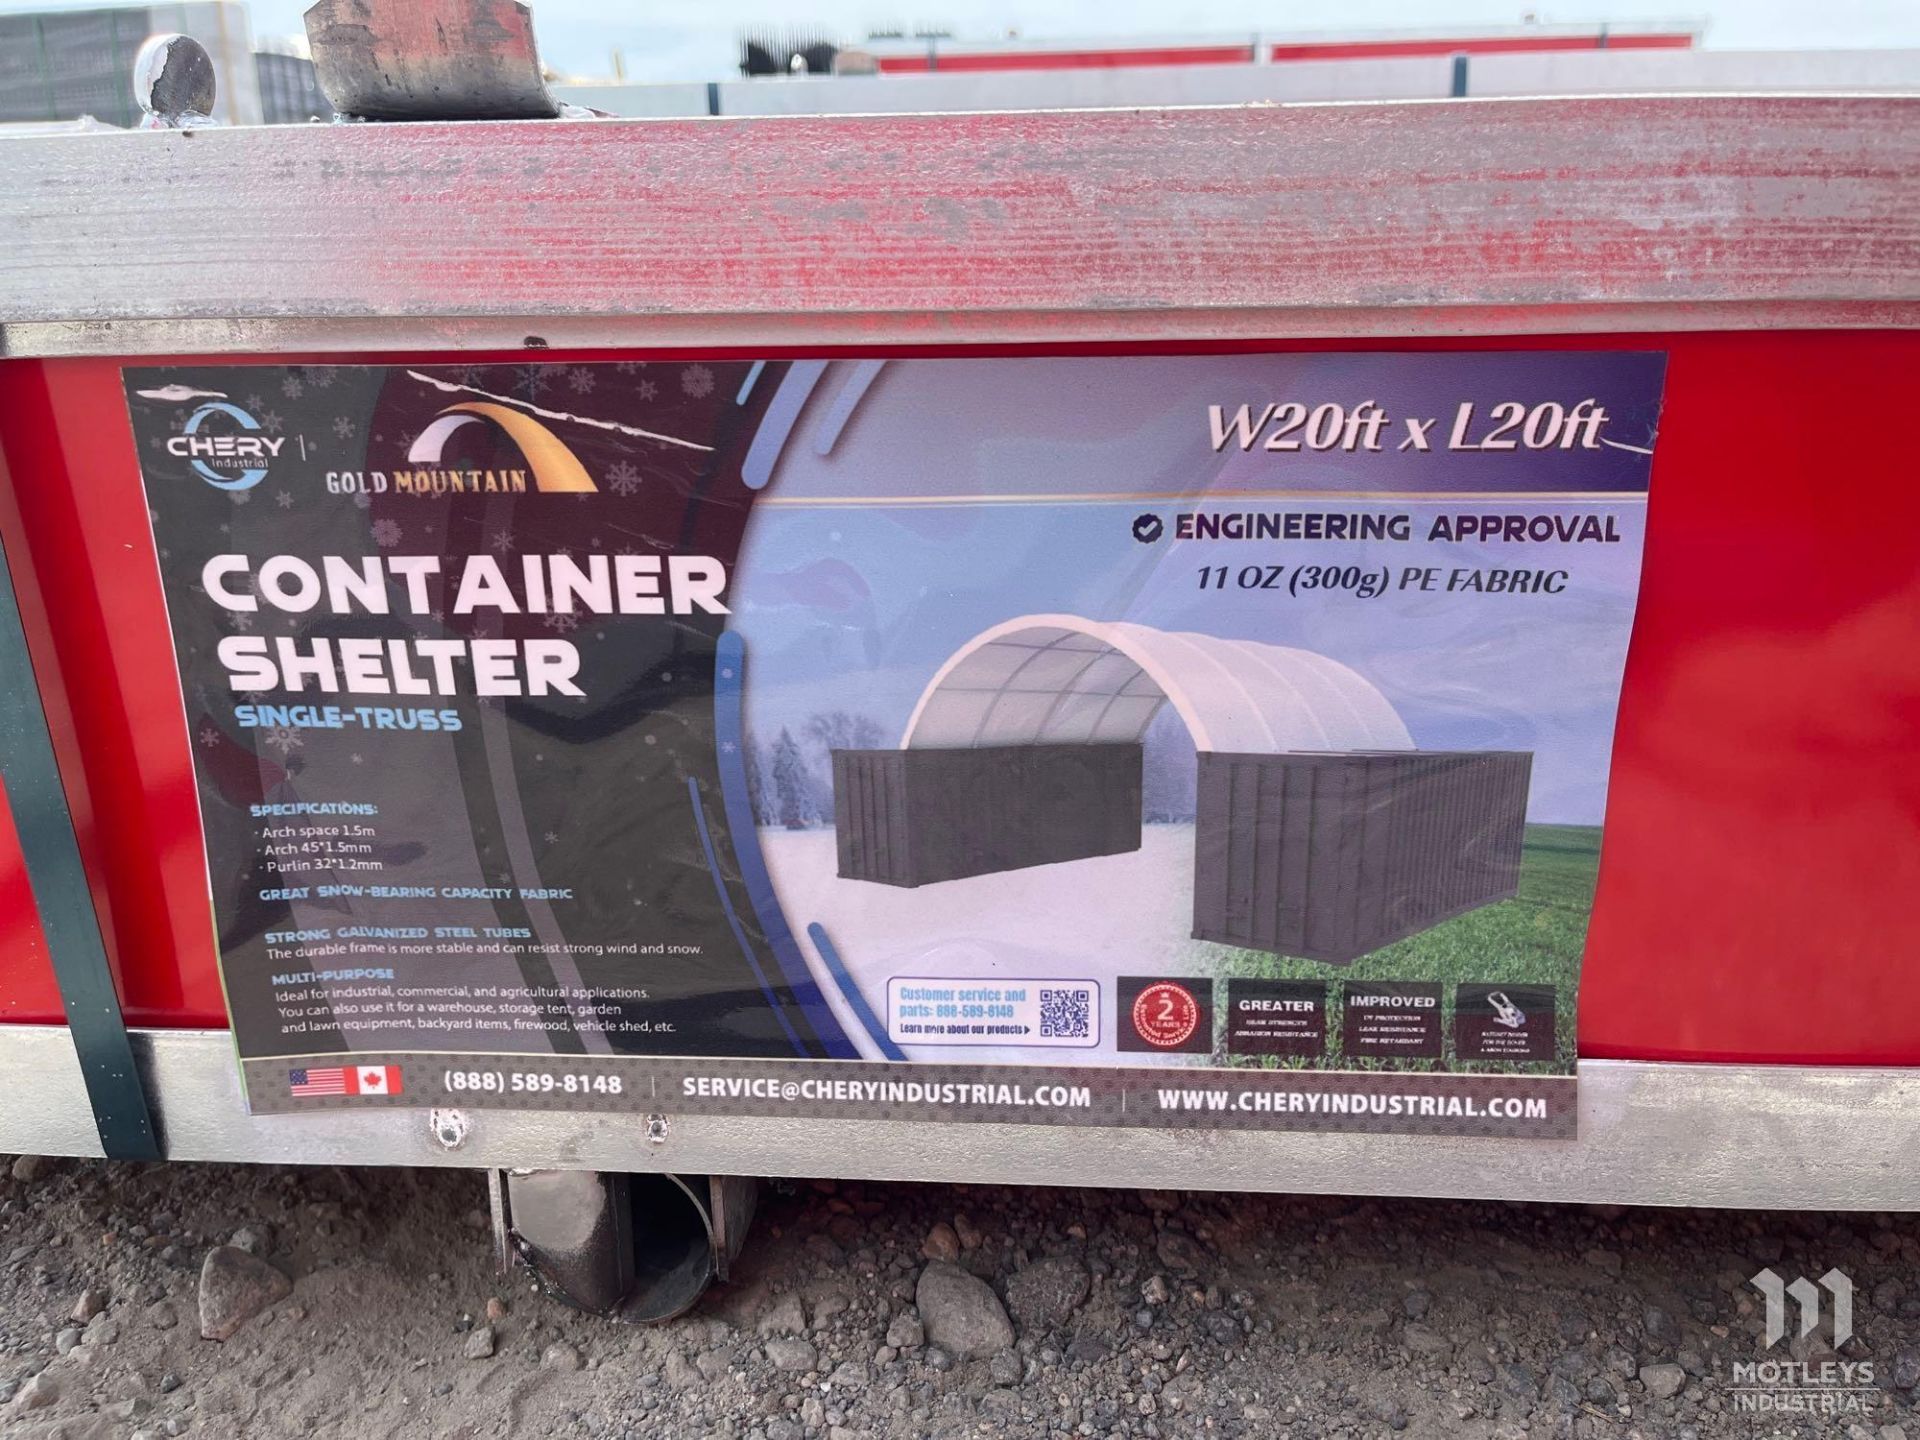 2024 Gold Mountain C2020-300g PE Container Shelter - Image 5 of 5